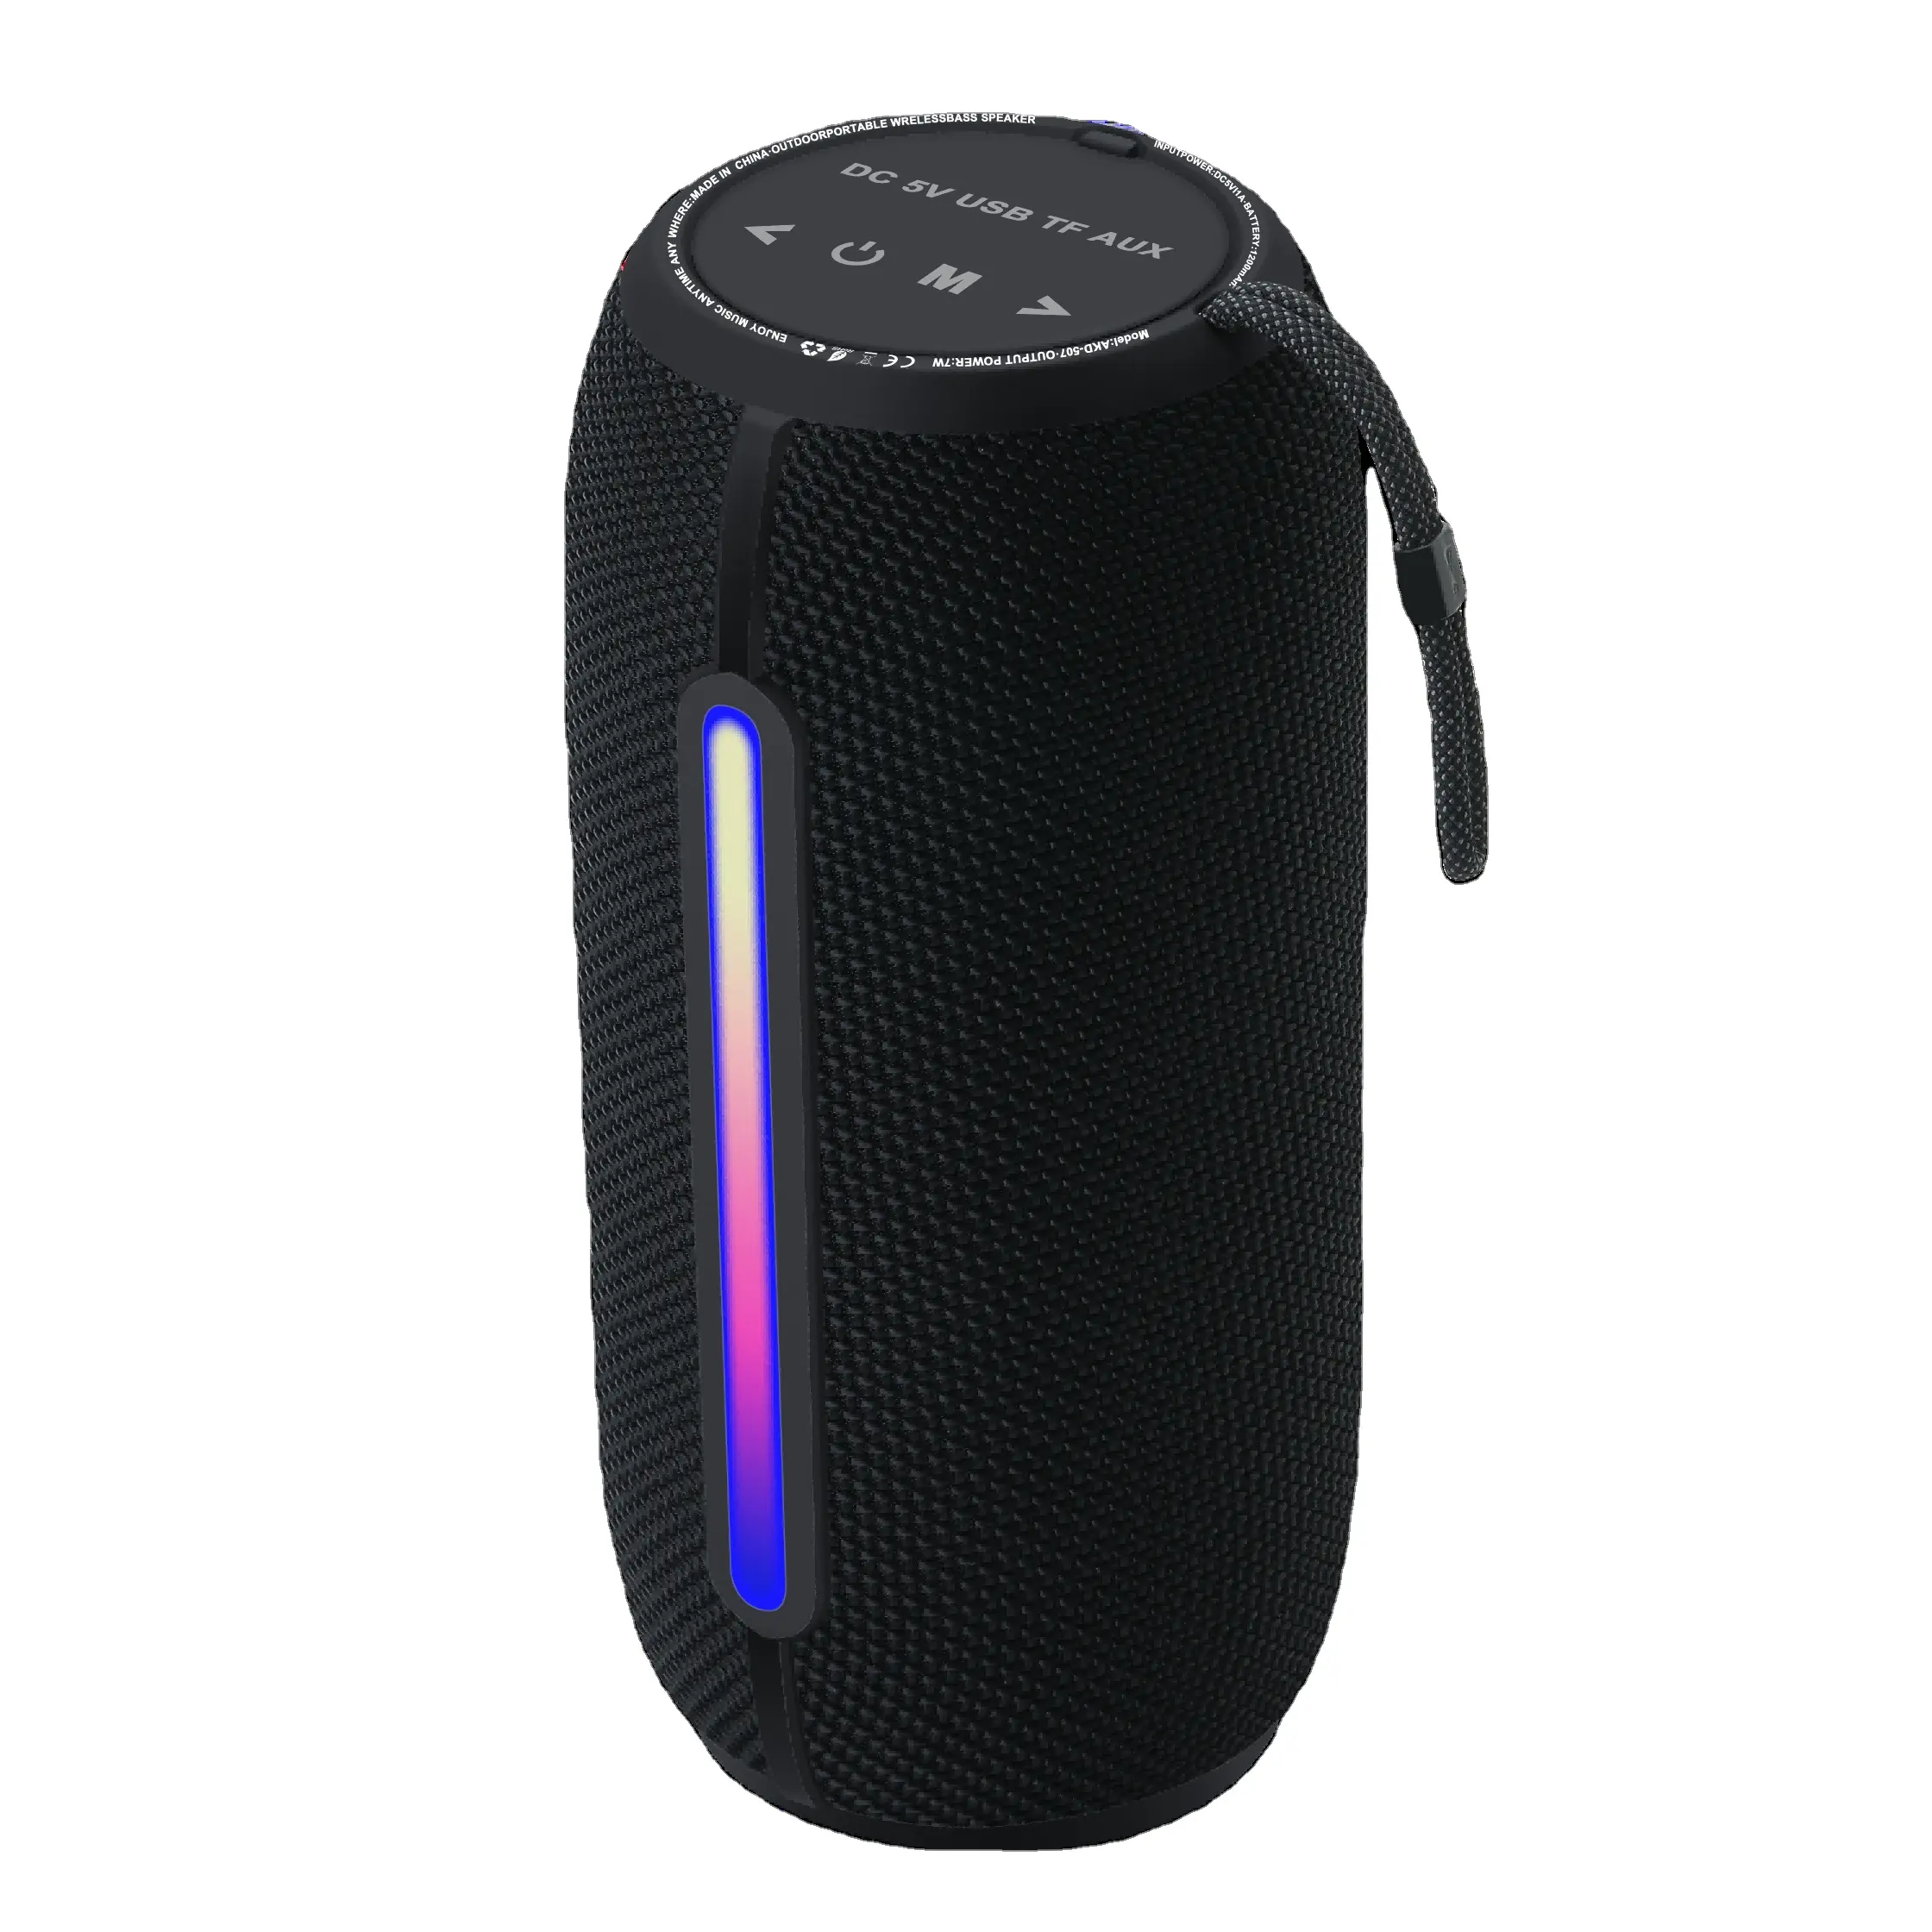 Best Selling RGB Light Portable Speaker Bluetooth Wireless Altavoz Bocina With Stereo Sound Heavy Bass For Outdoor Party Home